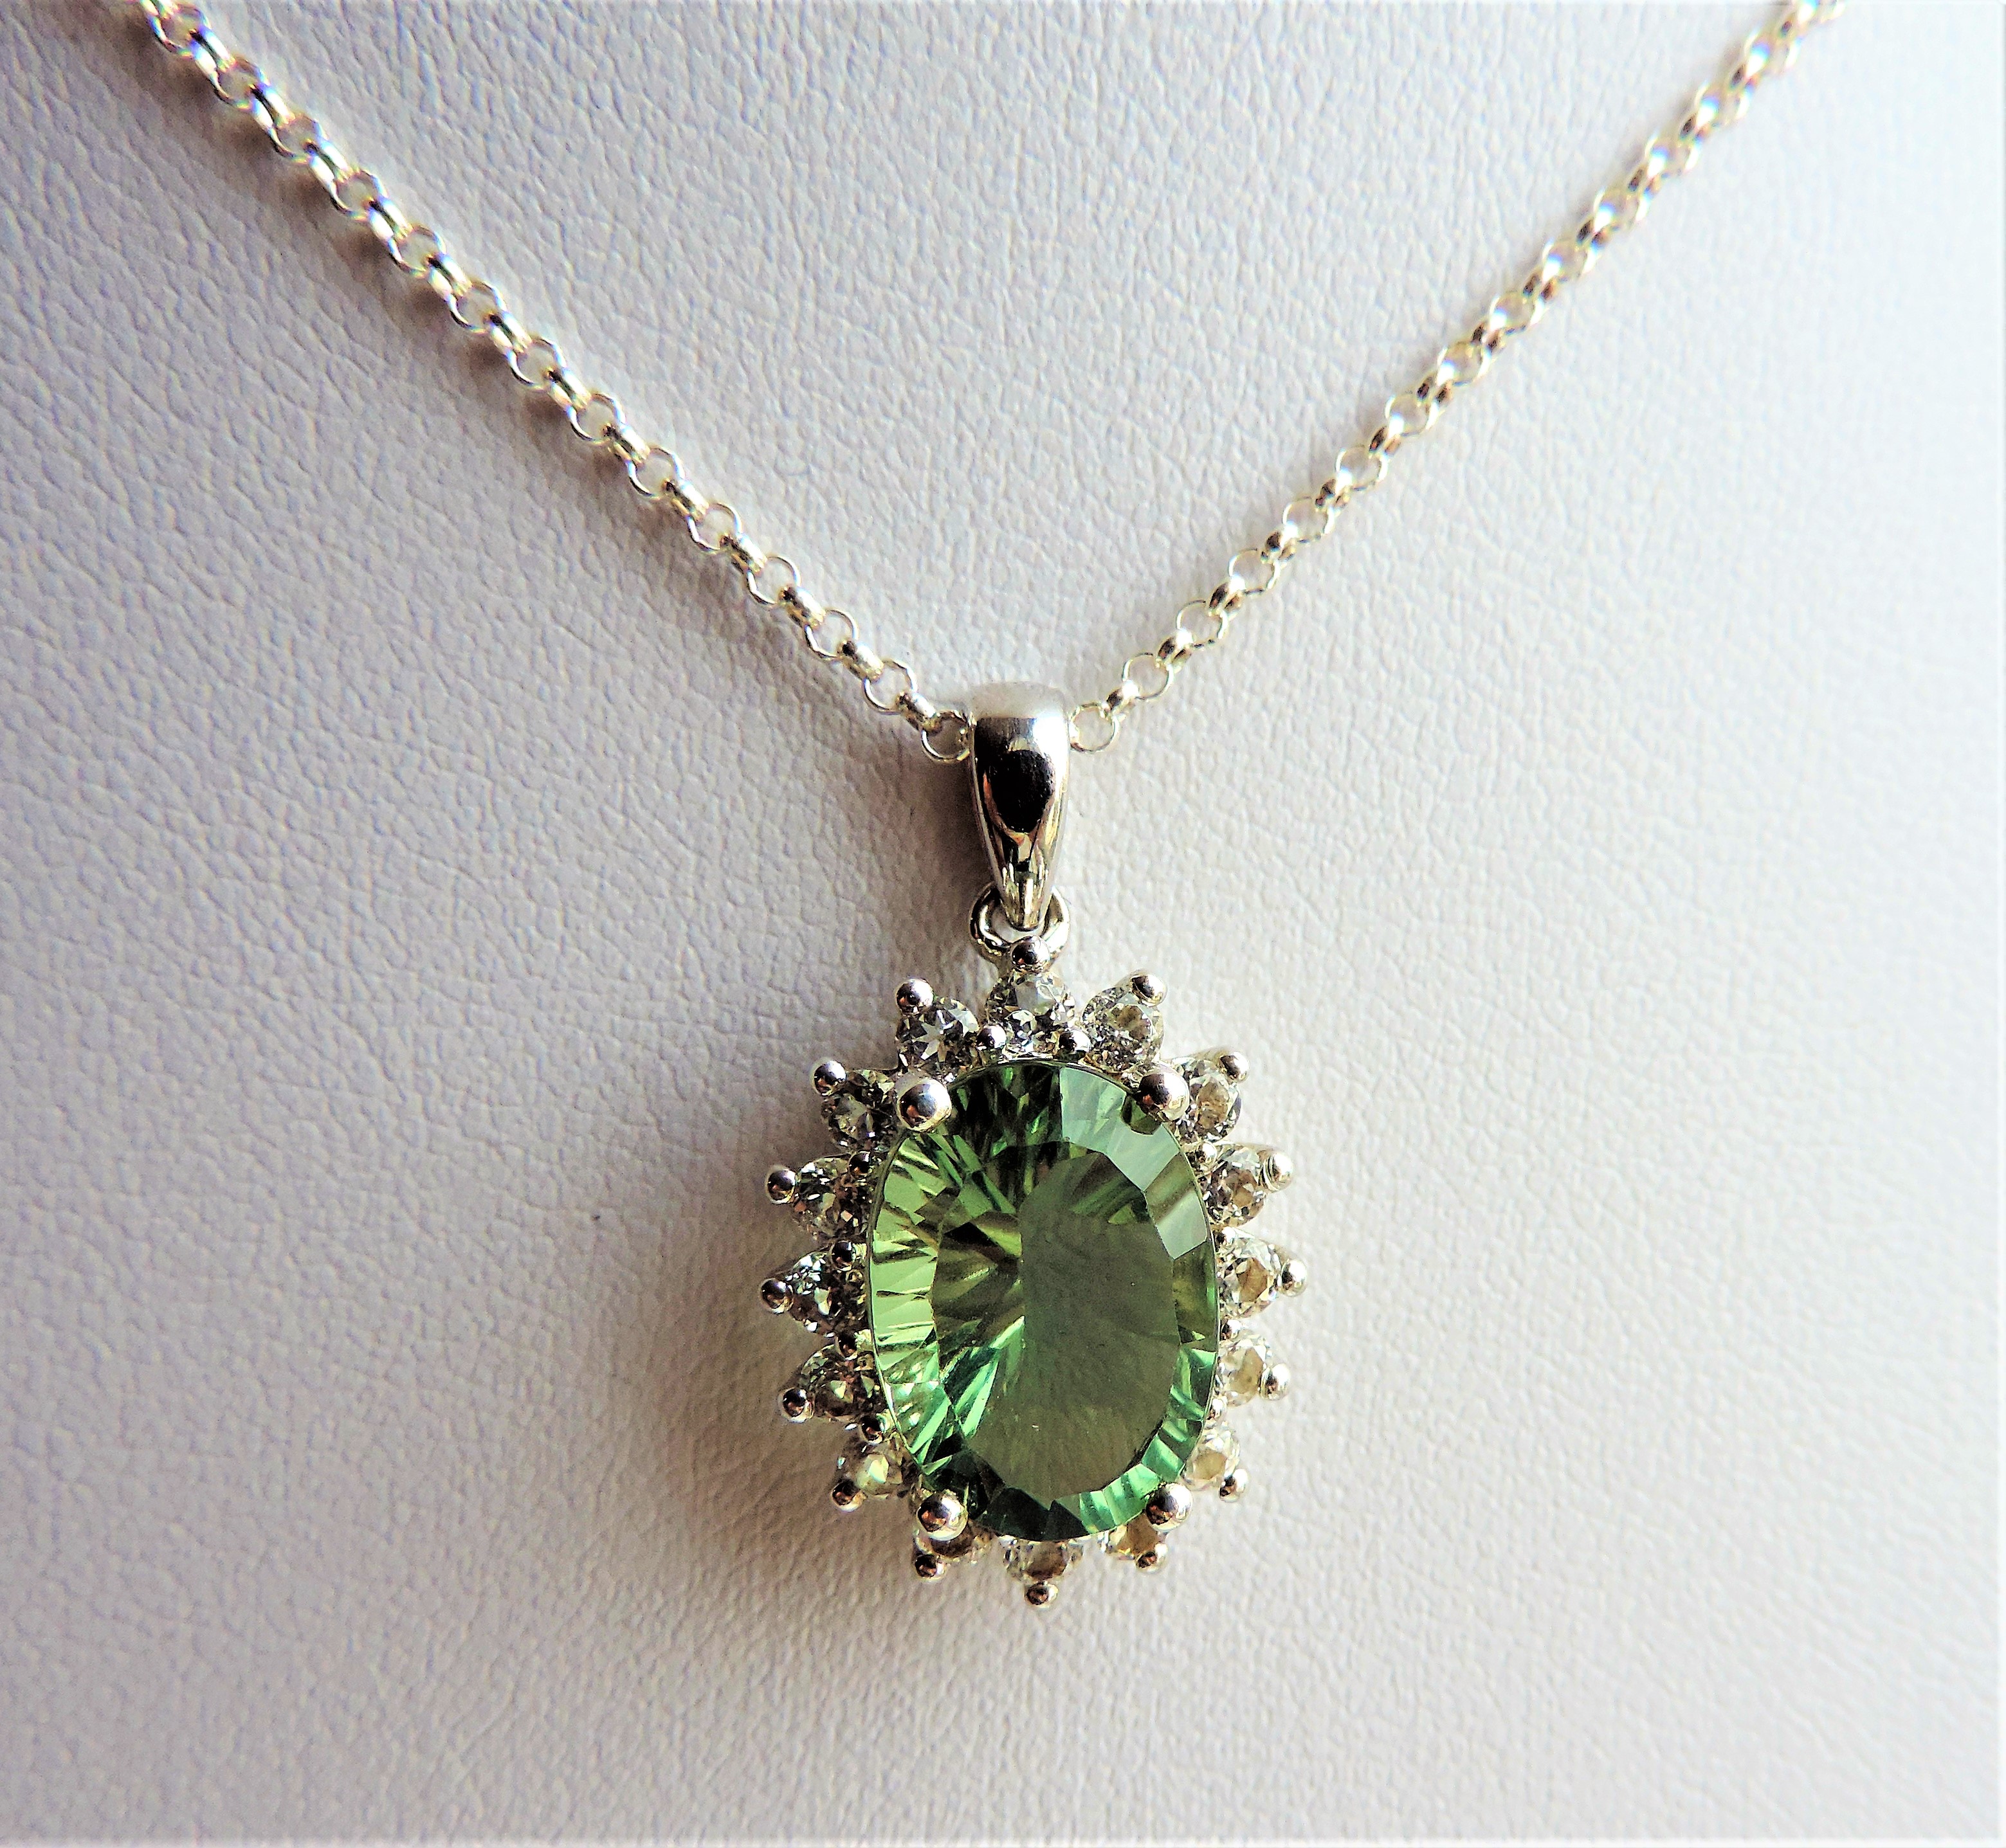 Sterling Silver 7.8 carat Green Tourmaline & Topaz Pendant Necklace - Image 3 of 4